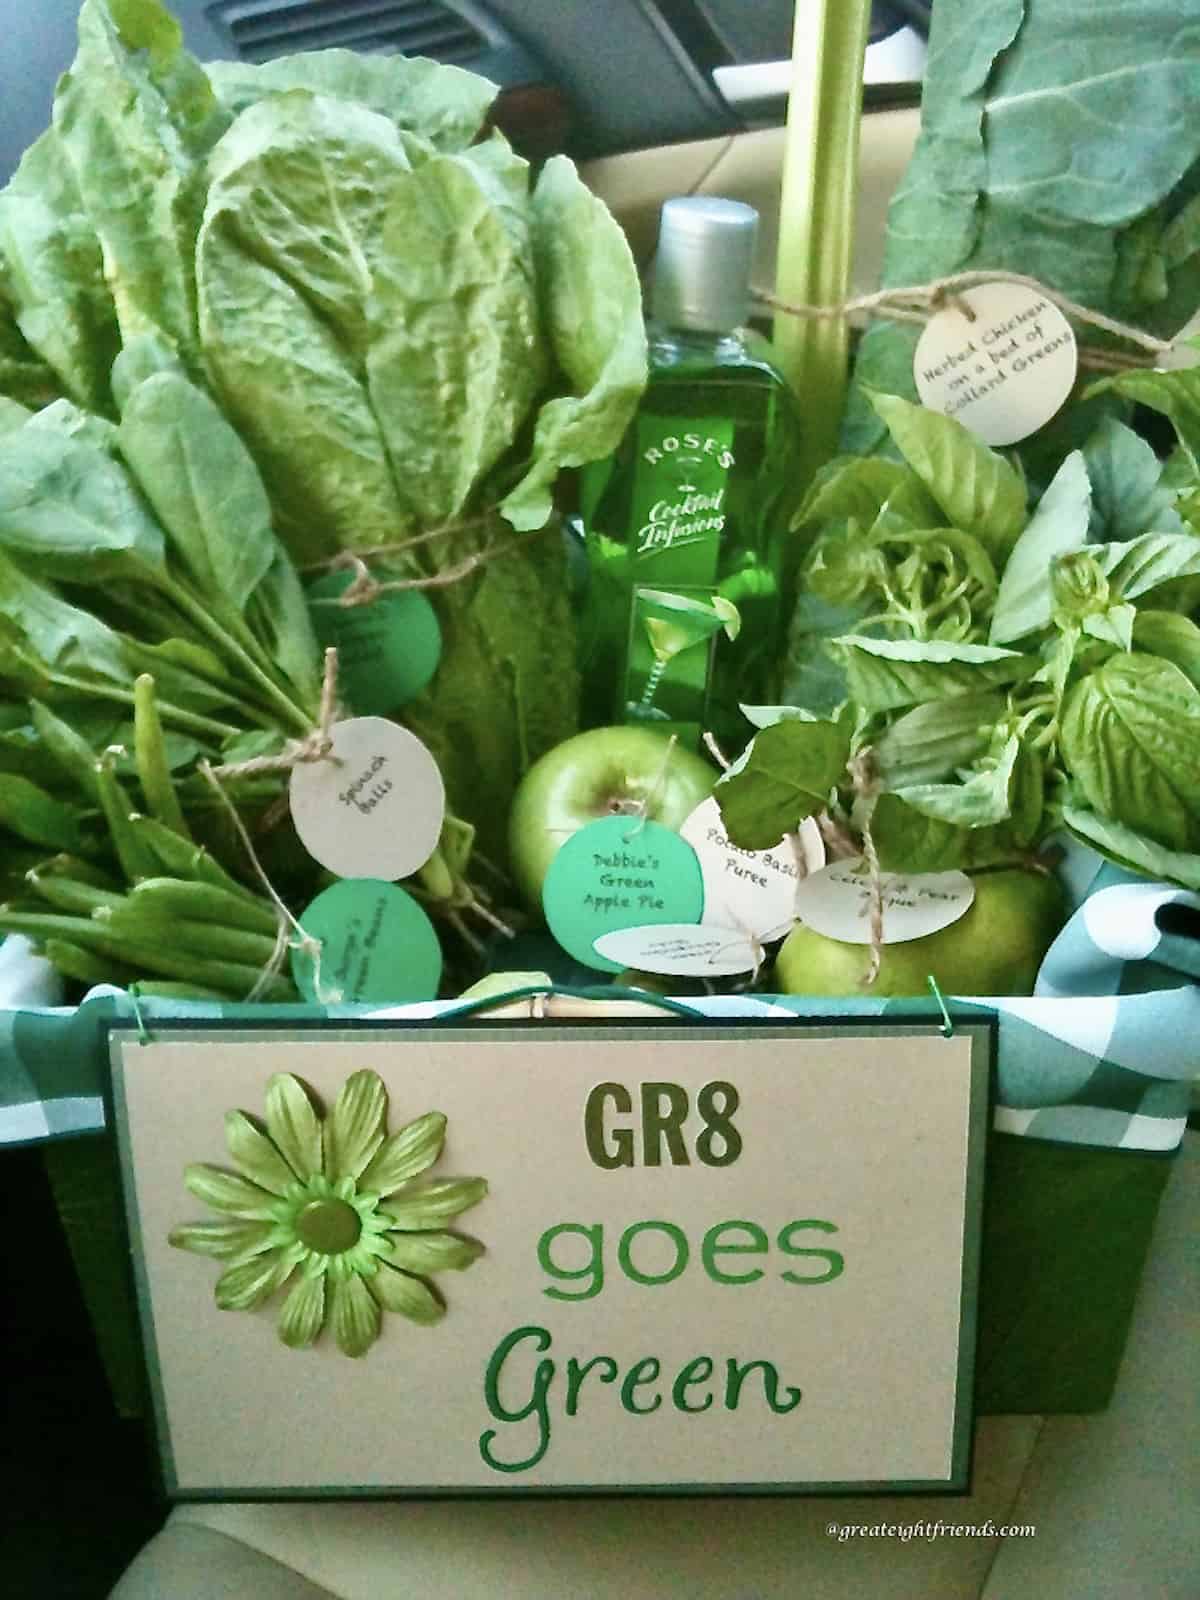 A basket filled with fresh green produce with a sign on the front of it saying, "Gr8 Goes Green".